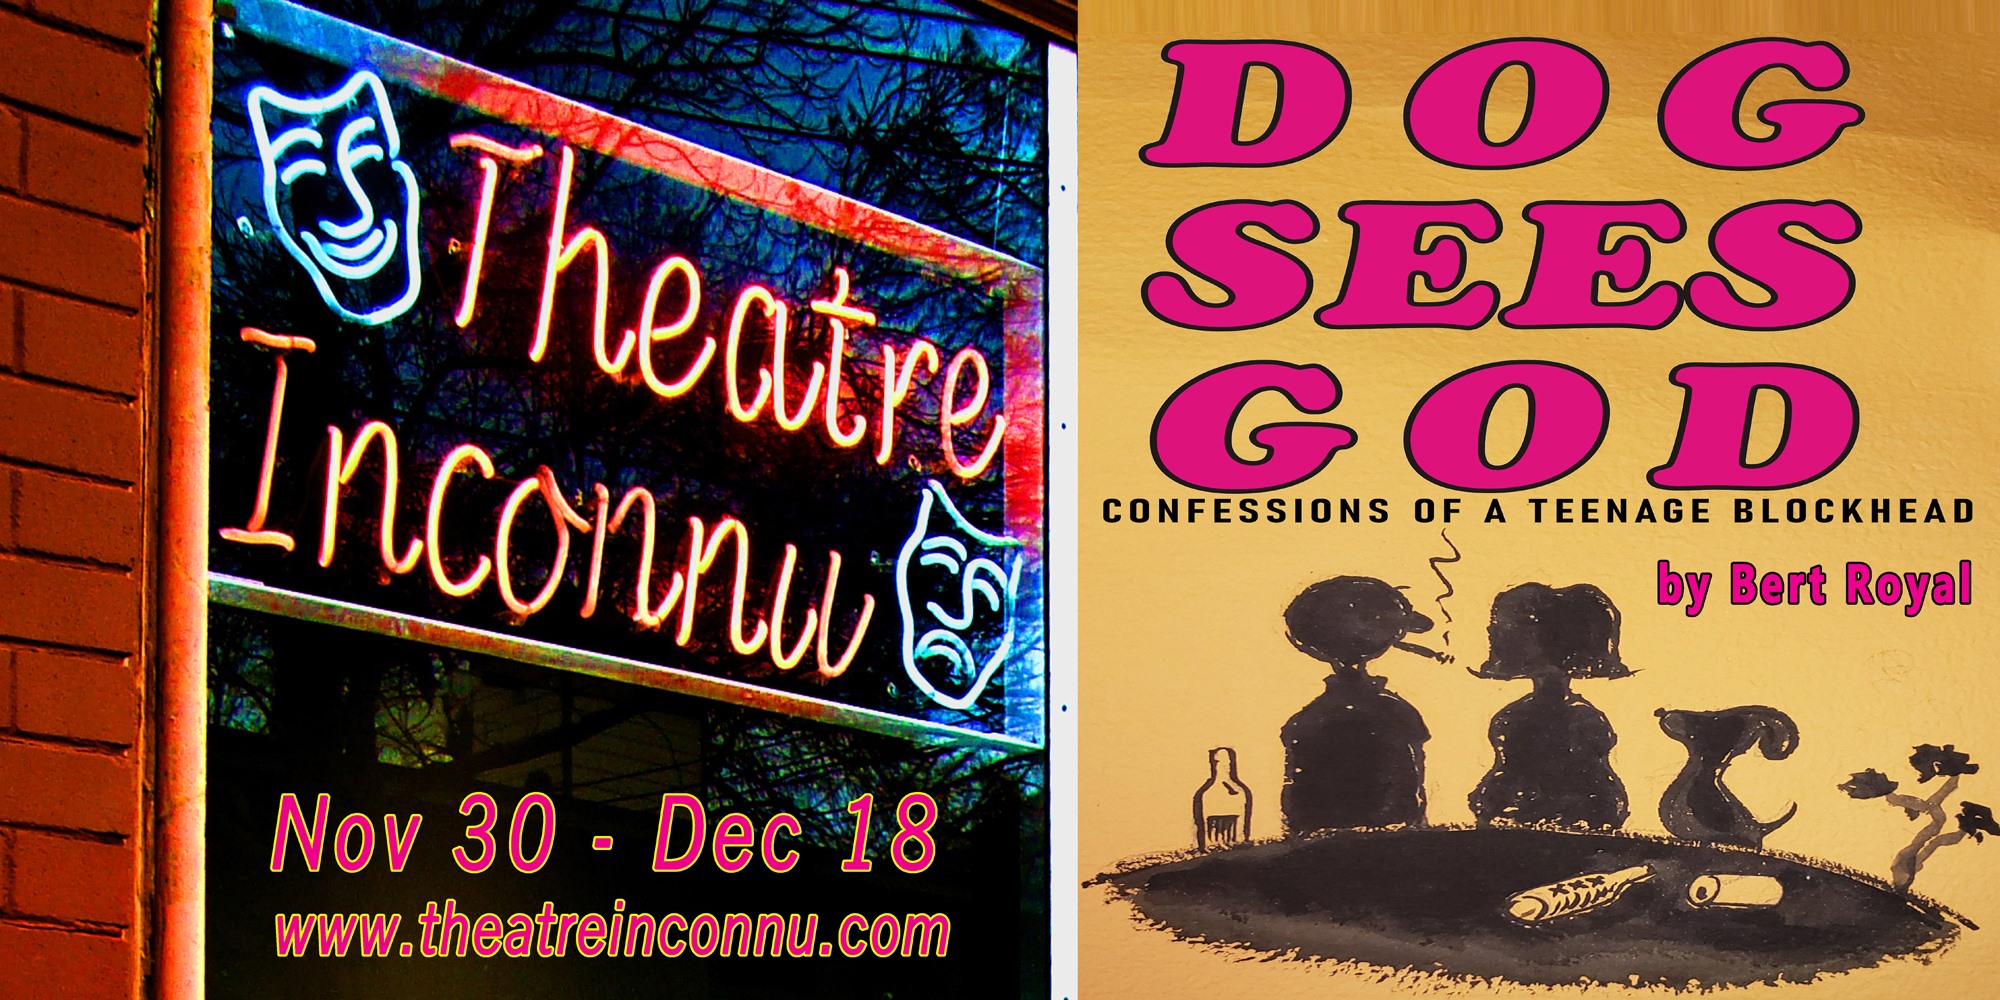 Theatre Inconnu’s Dog Sees God adds a twist to nostalgic Charlie Brown comics